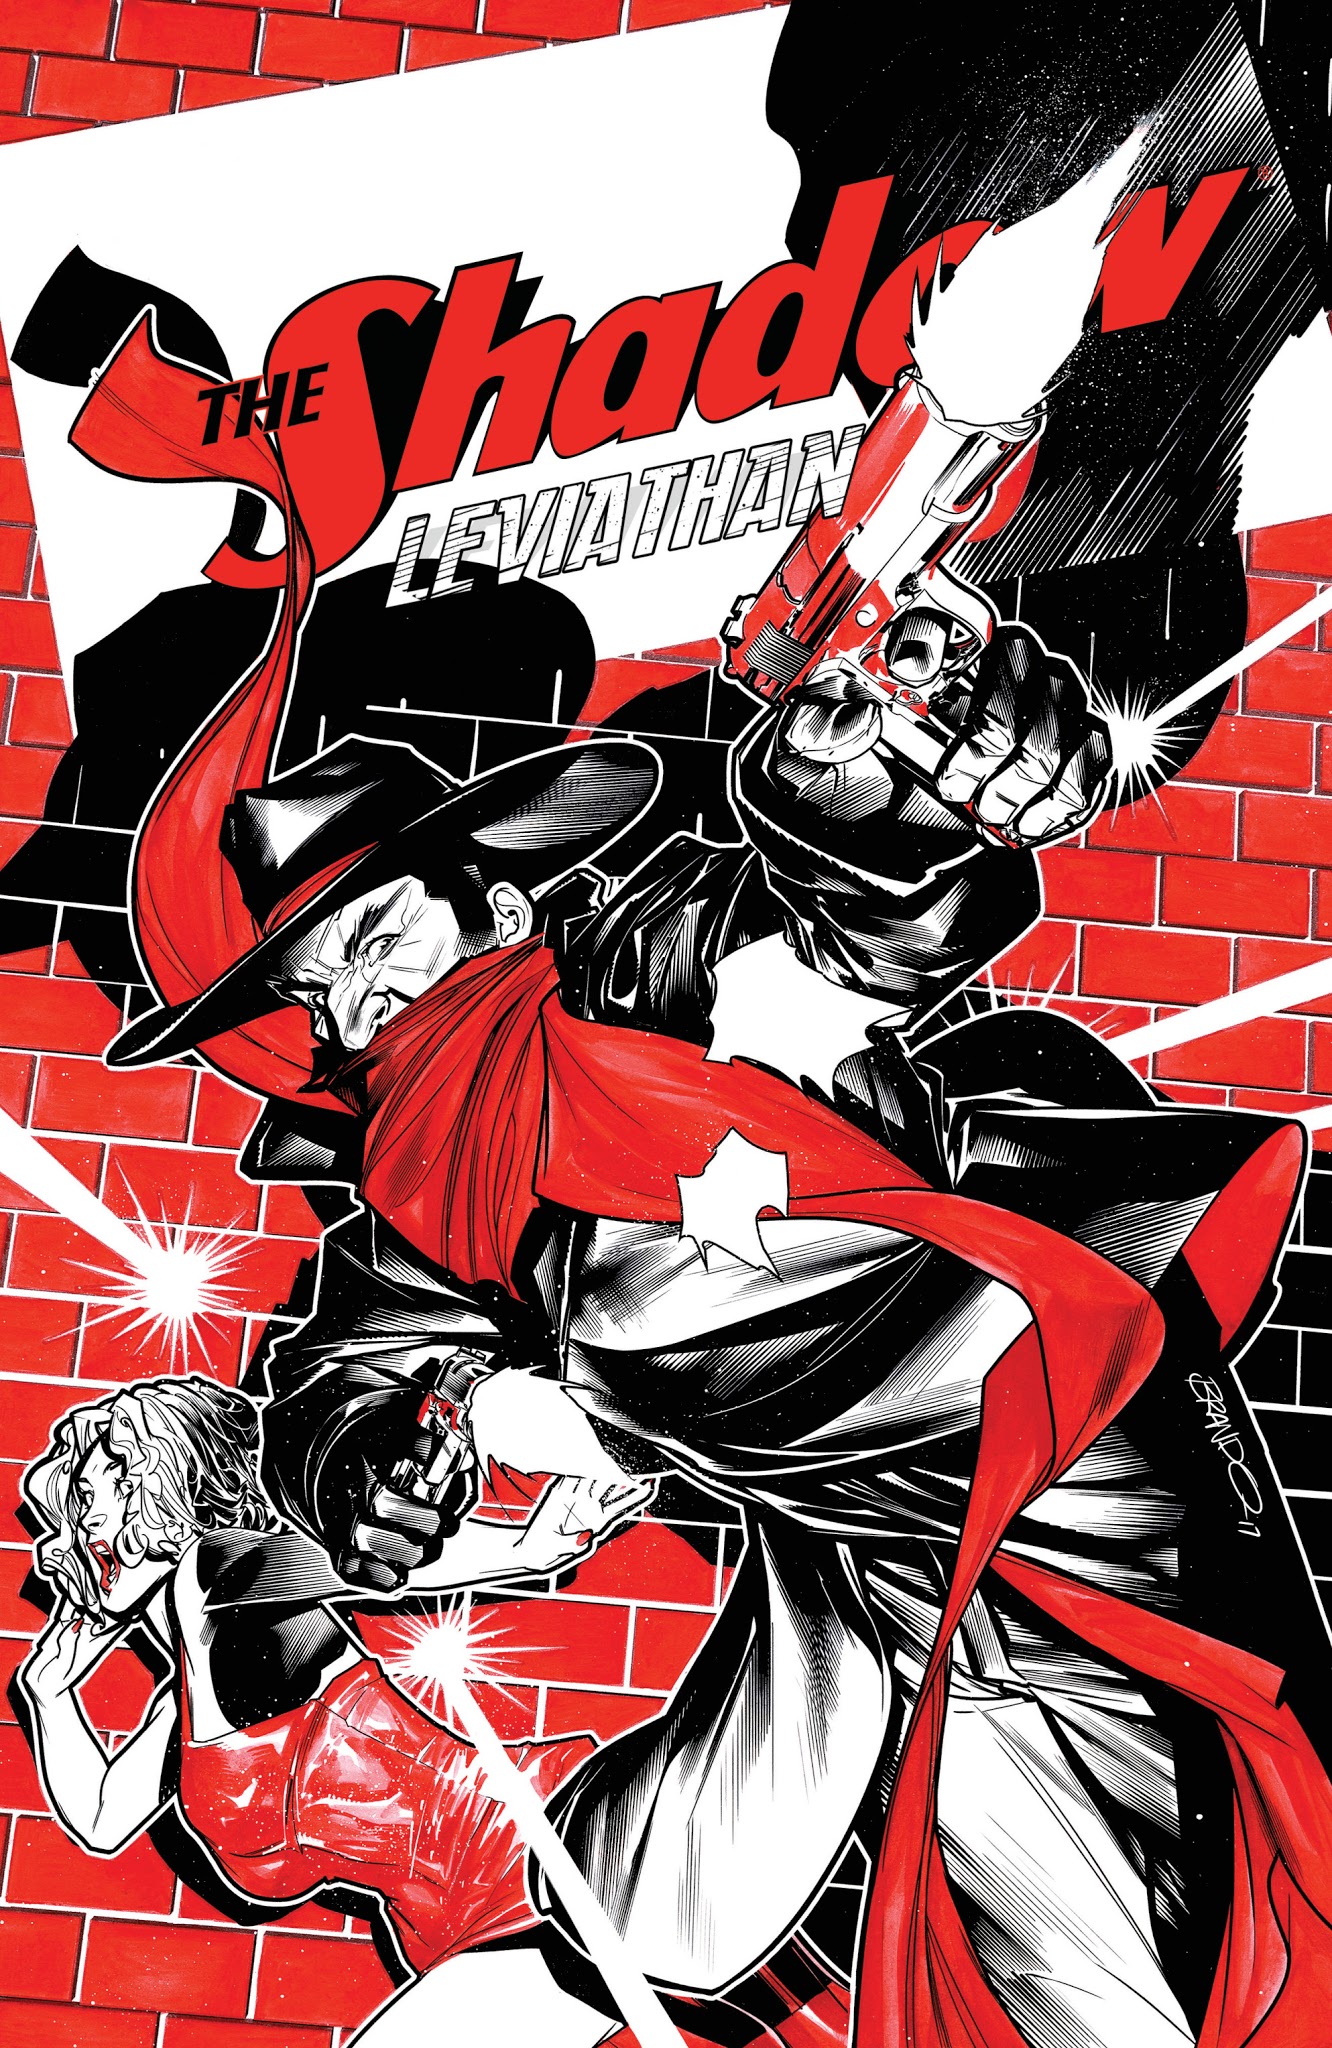 Read online The Shadow: Leviathan comic -  Issue # TPB - 3